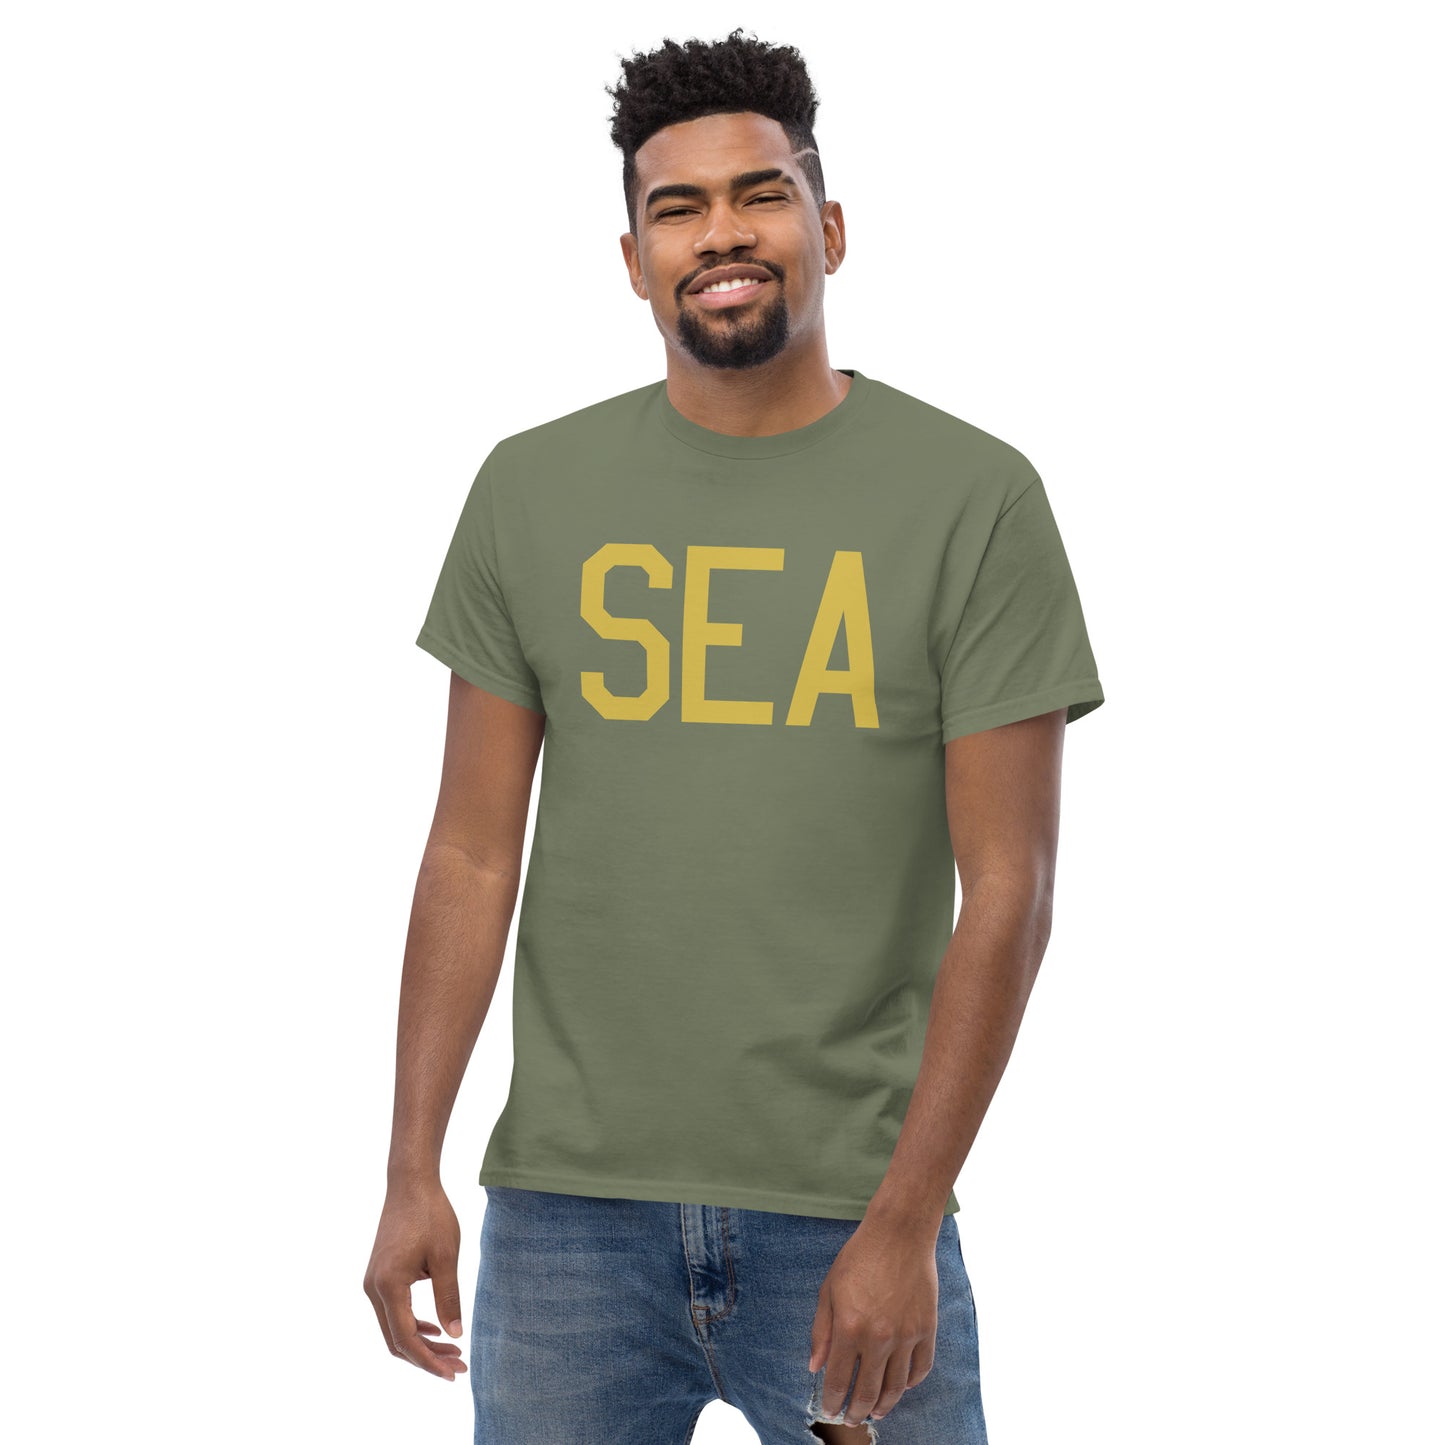 Aviation Enthusiast Men's Tee - Old Gold Graphic • SEA Seattle • YHM Designs - Image 06